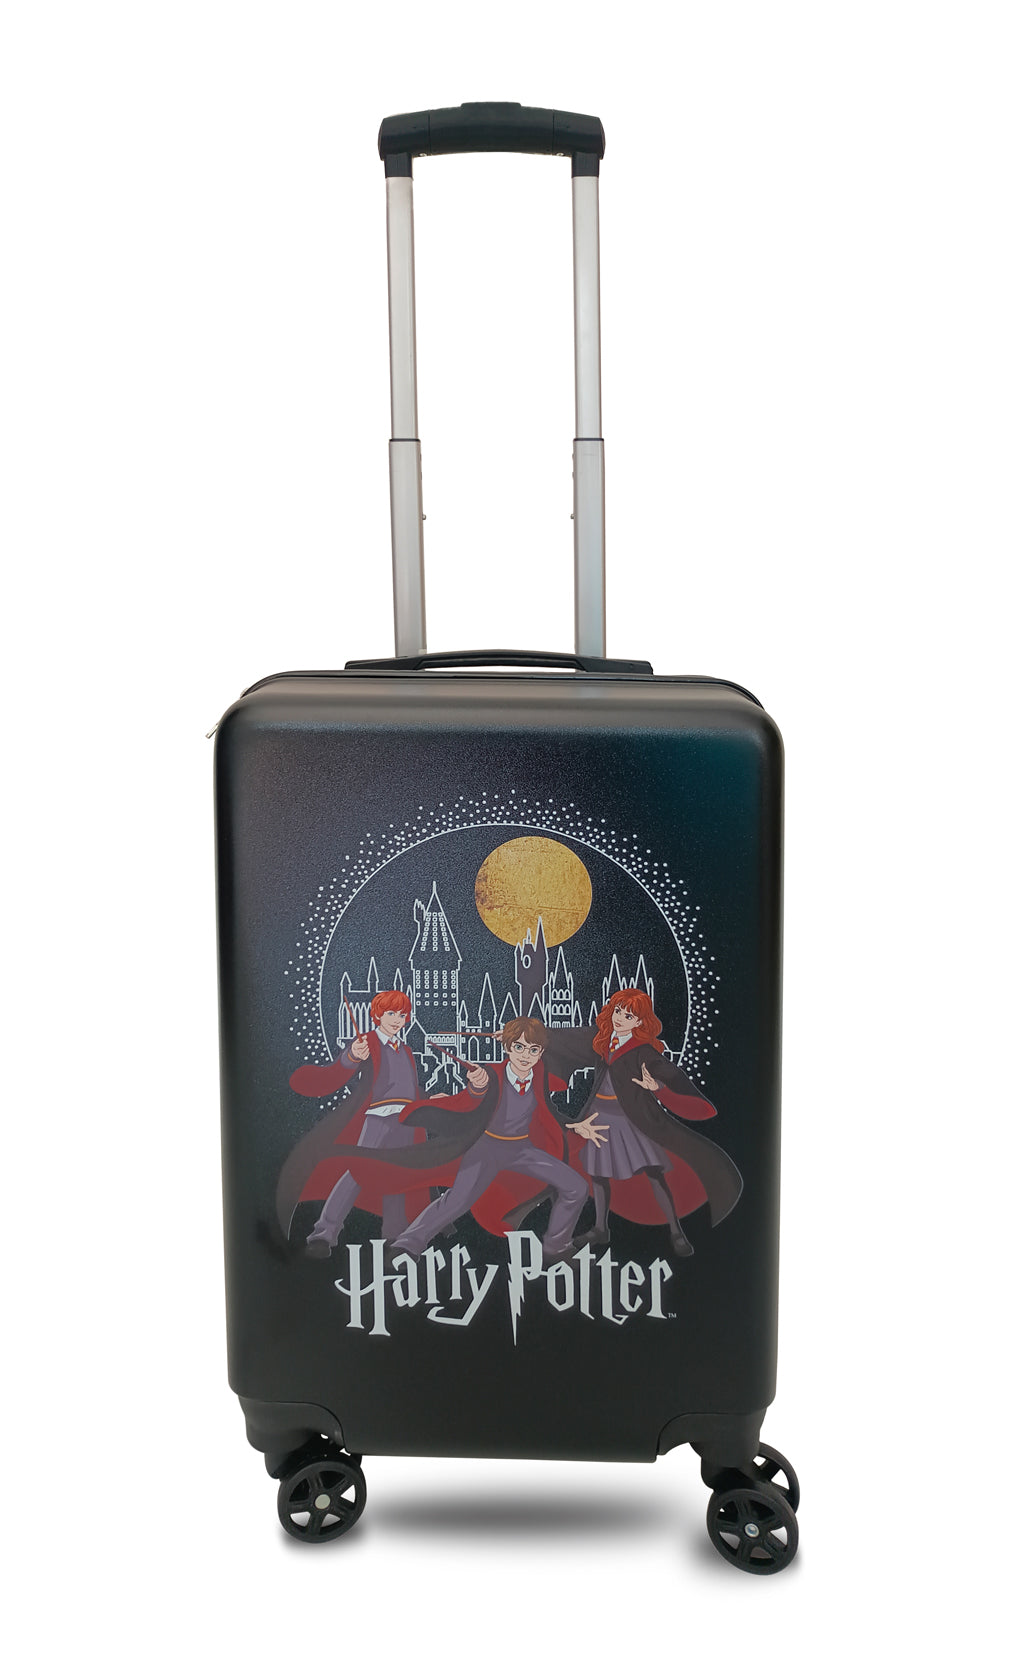 HARRY POTTER CARRY-ON Suitcase